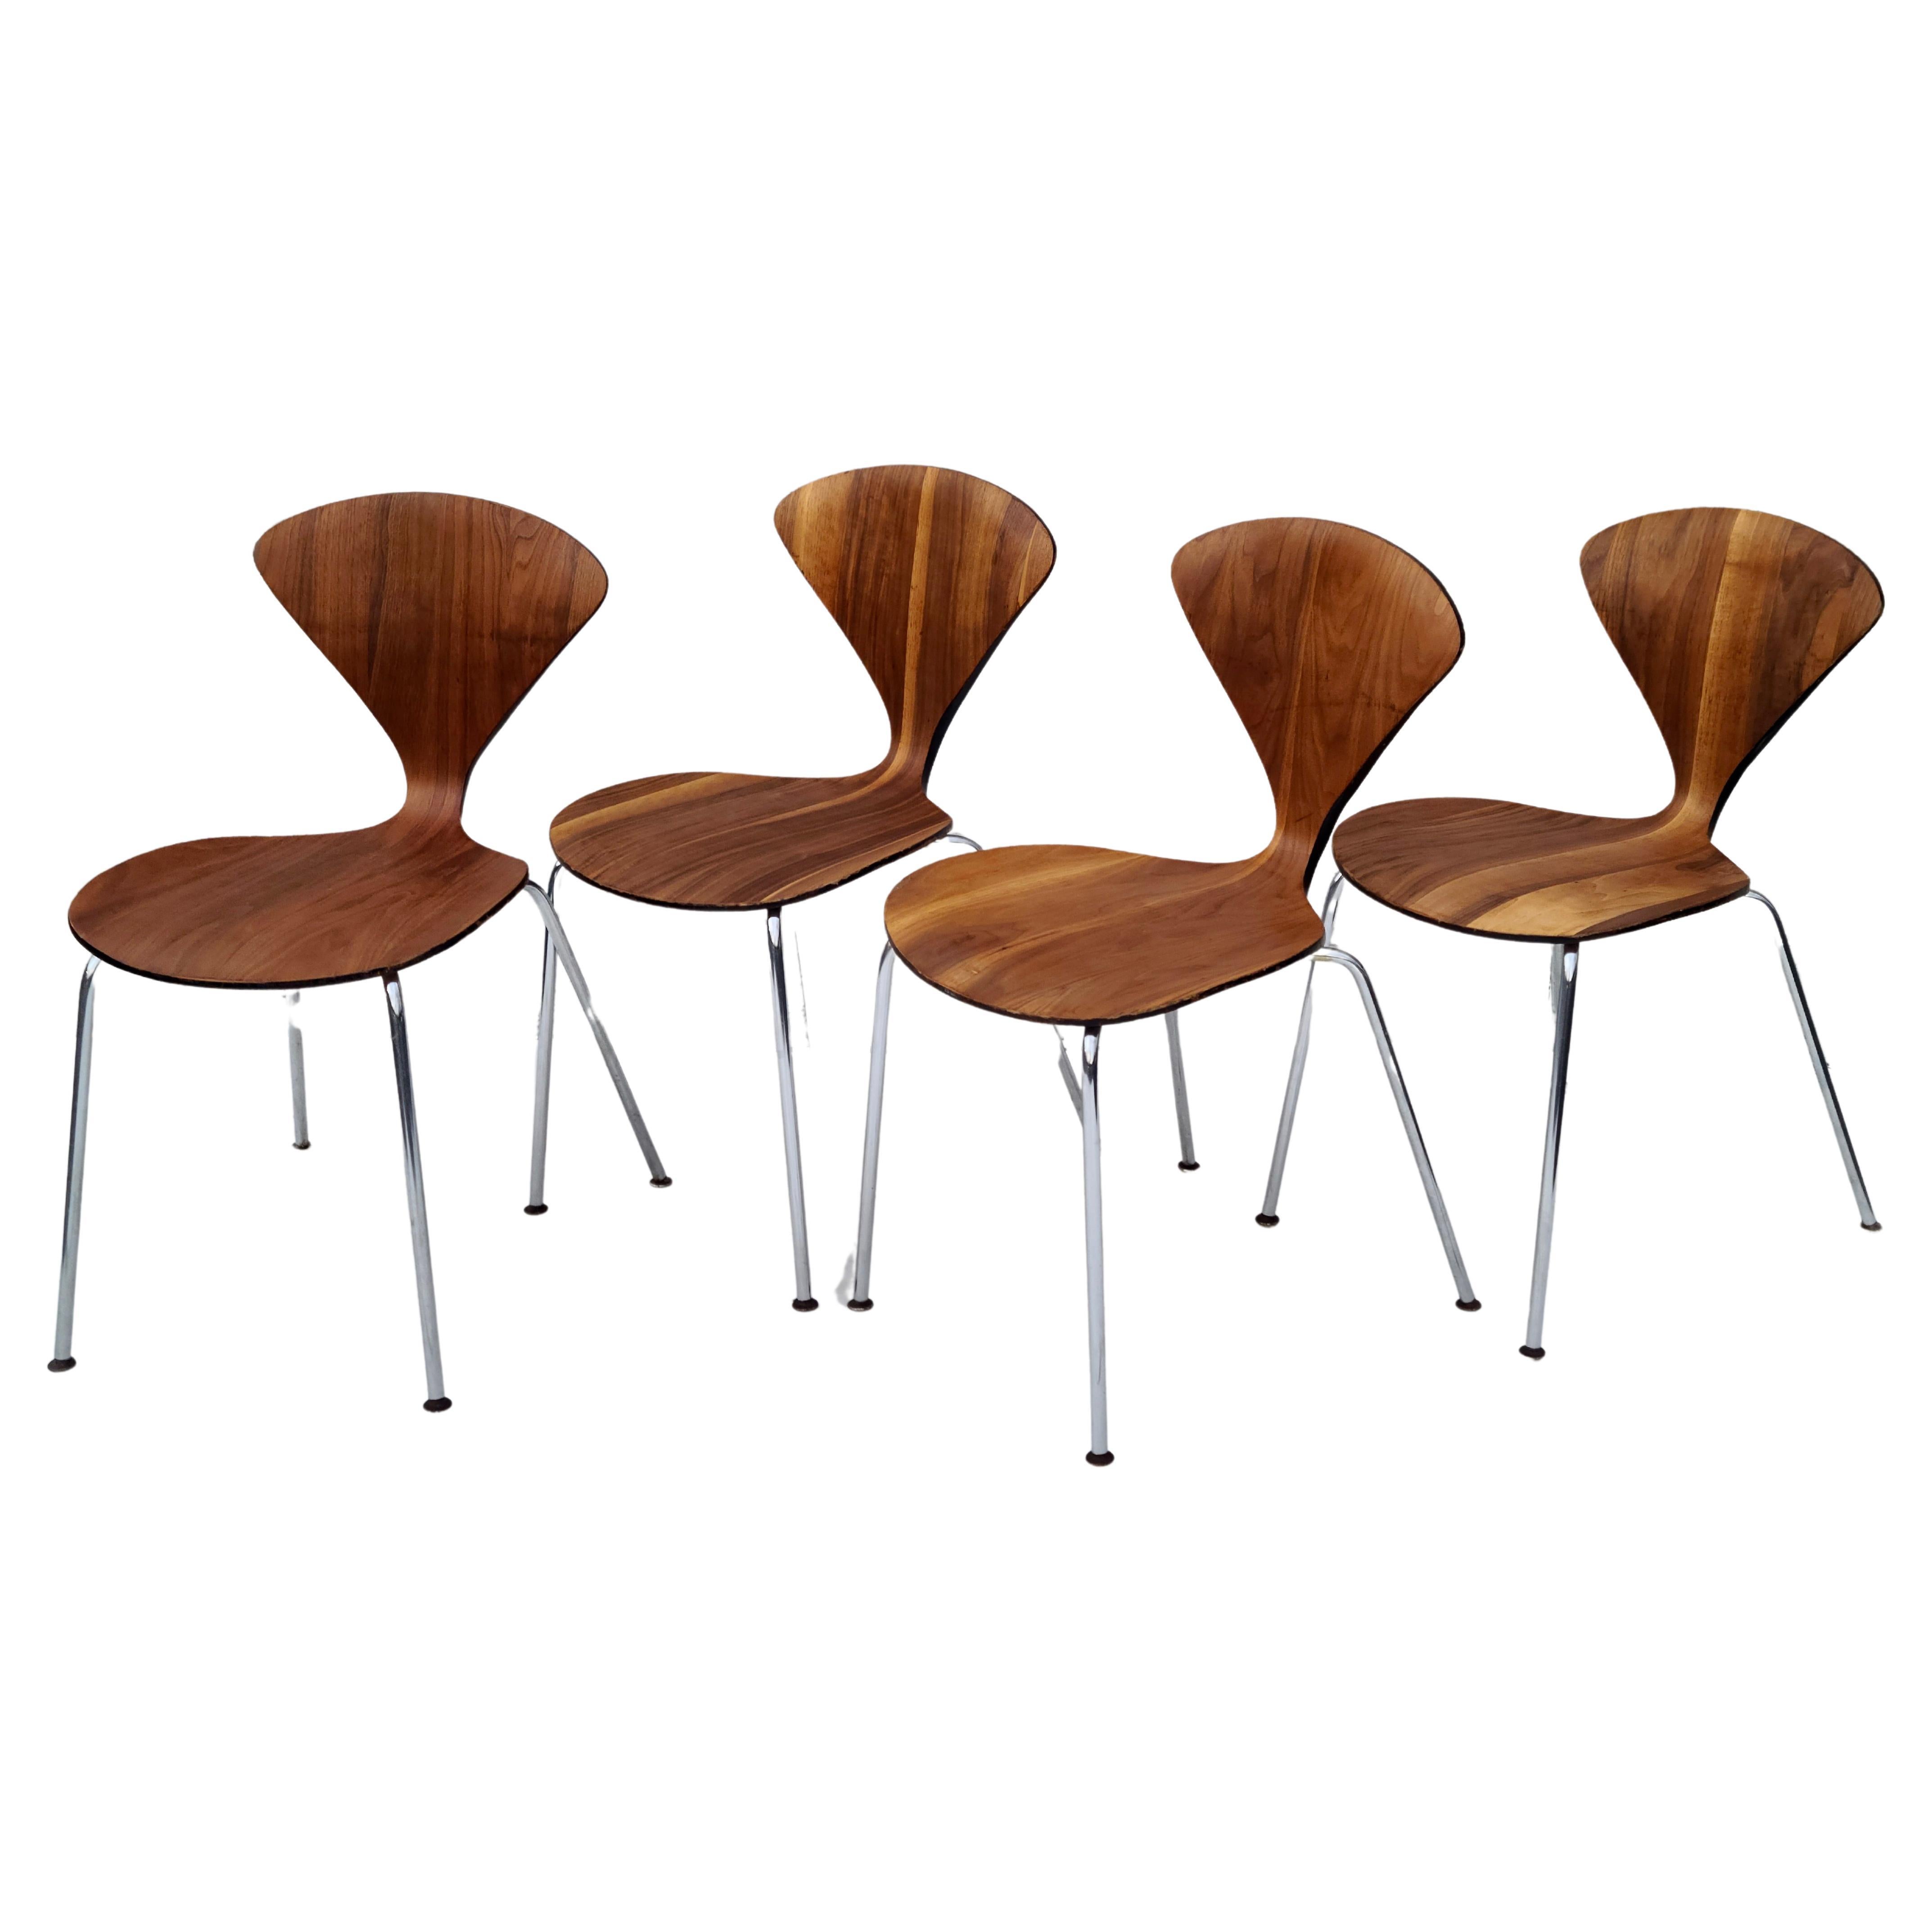 Please feel free to reach out for accurate shipping to your location.

Set of 4 Norman Cherner side chairs.
Walnut veneer on chrome bases.
These chairs have rare Directional labels.
Some light refinishing to refresh the grain, and 
preserve some